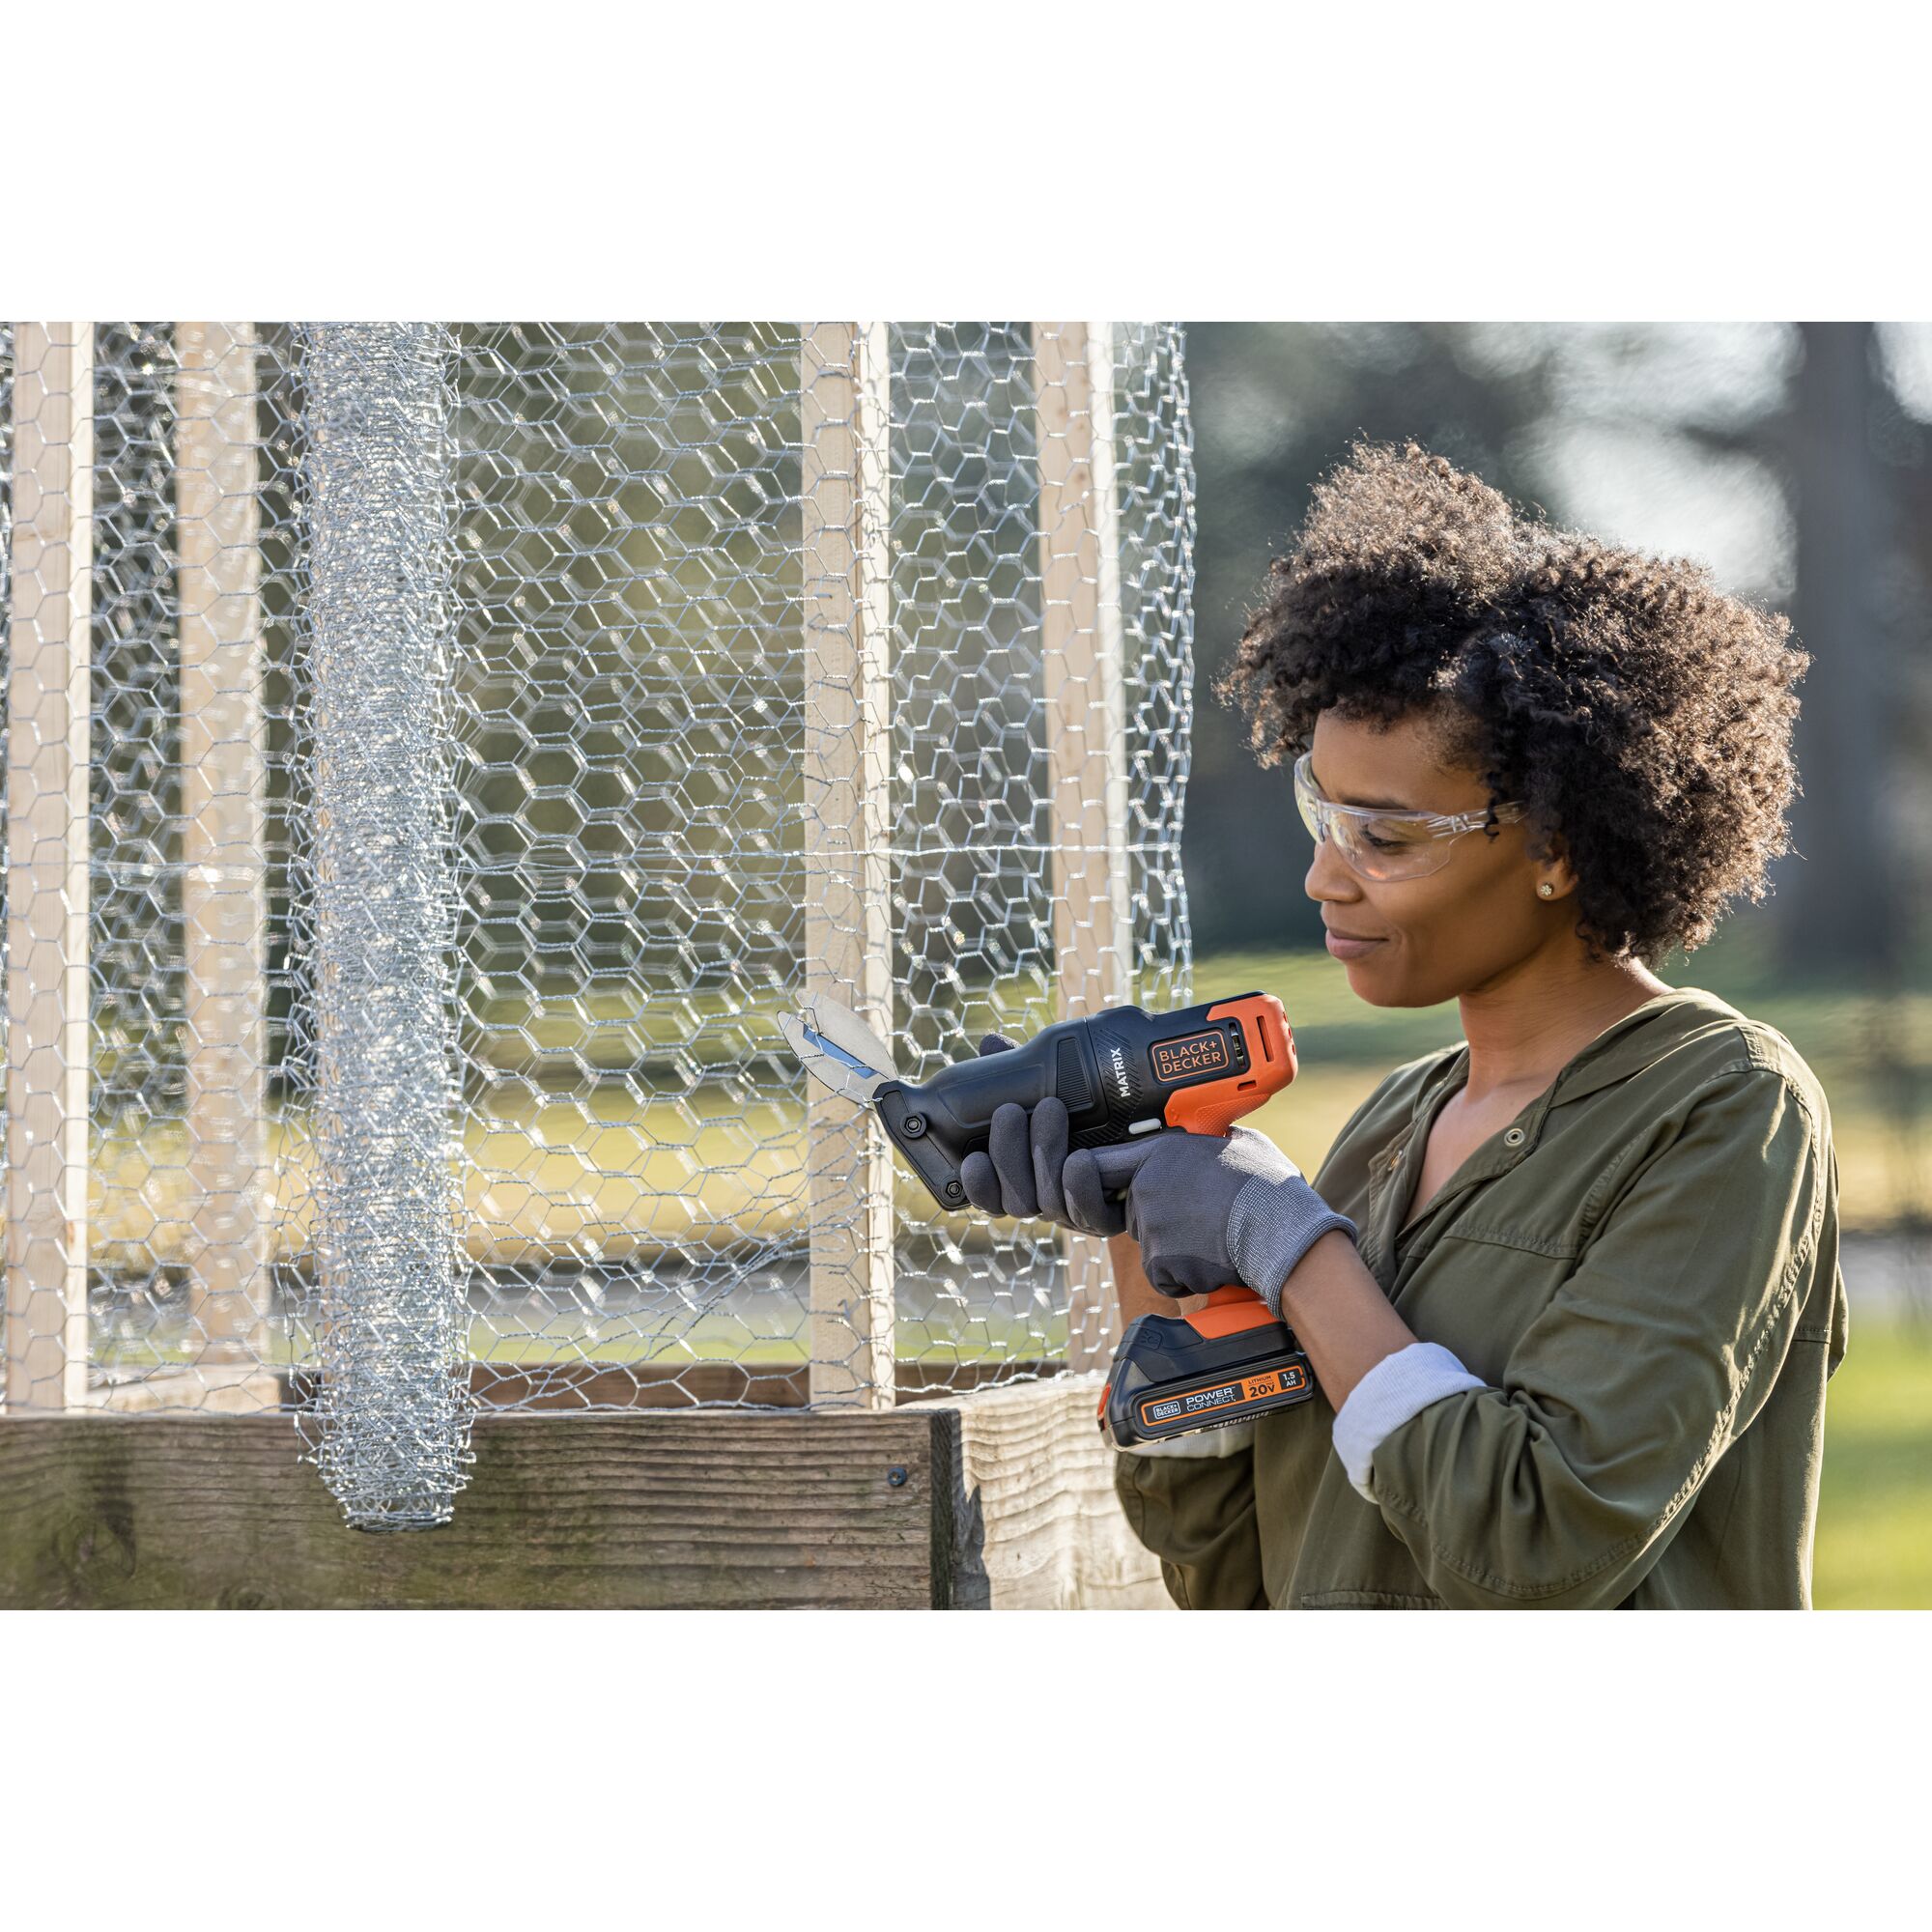 MATRIX™ Drill, wall, tool, drill, image, Give your walls a refresh with  the MATRIX™ Drill and Picture Hanging Tool. Instant mood boost!   By BLACK+DECKER